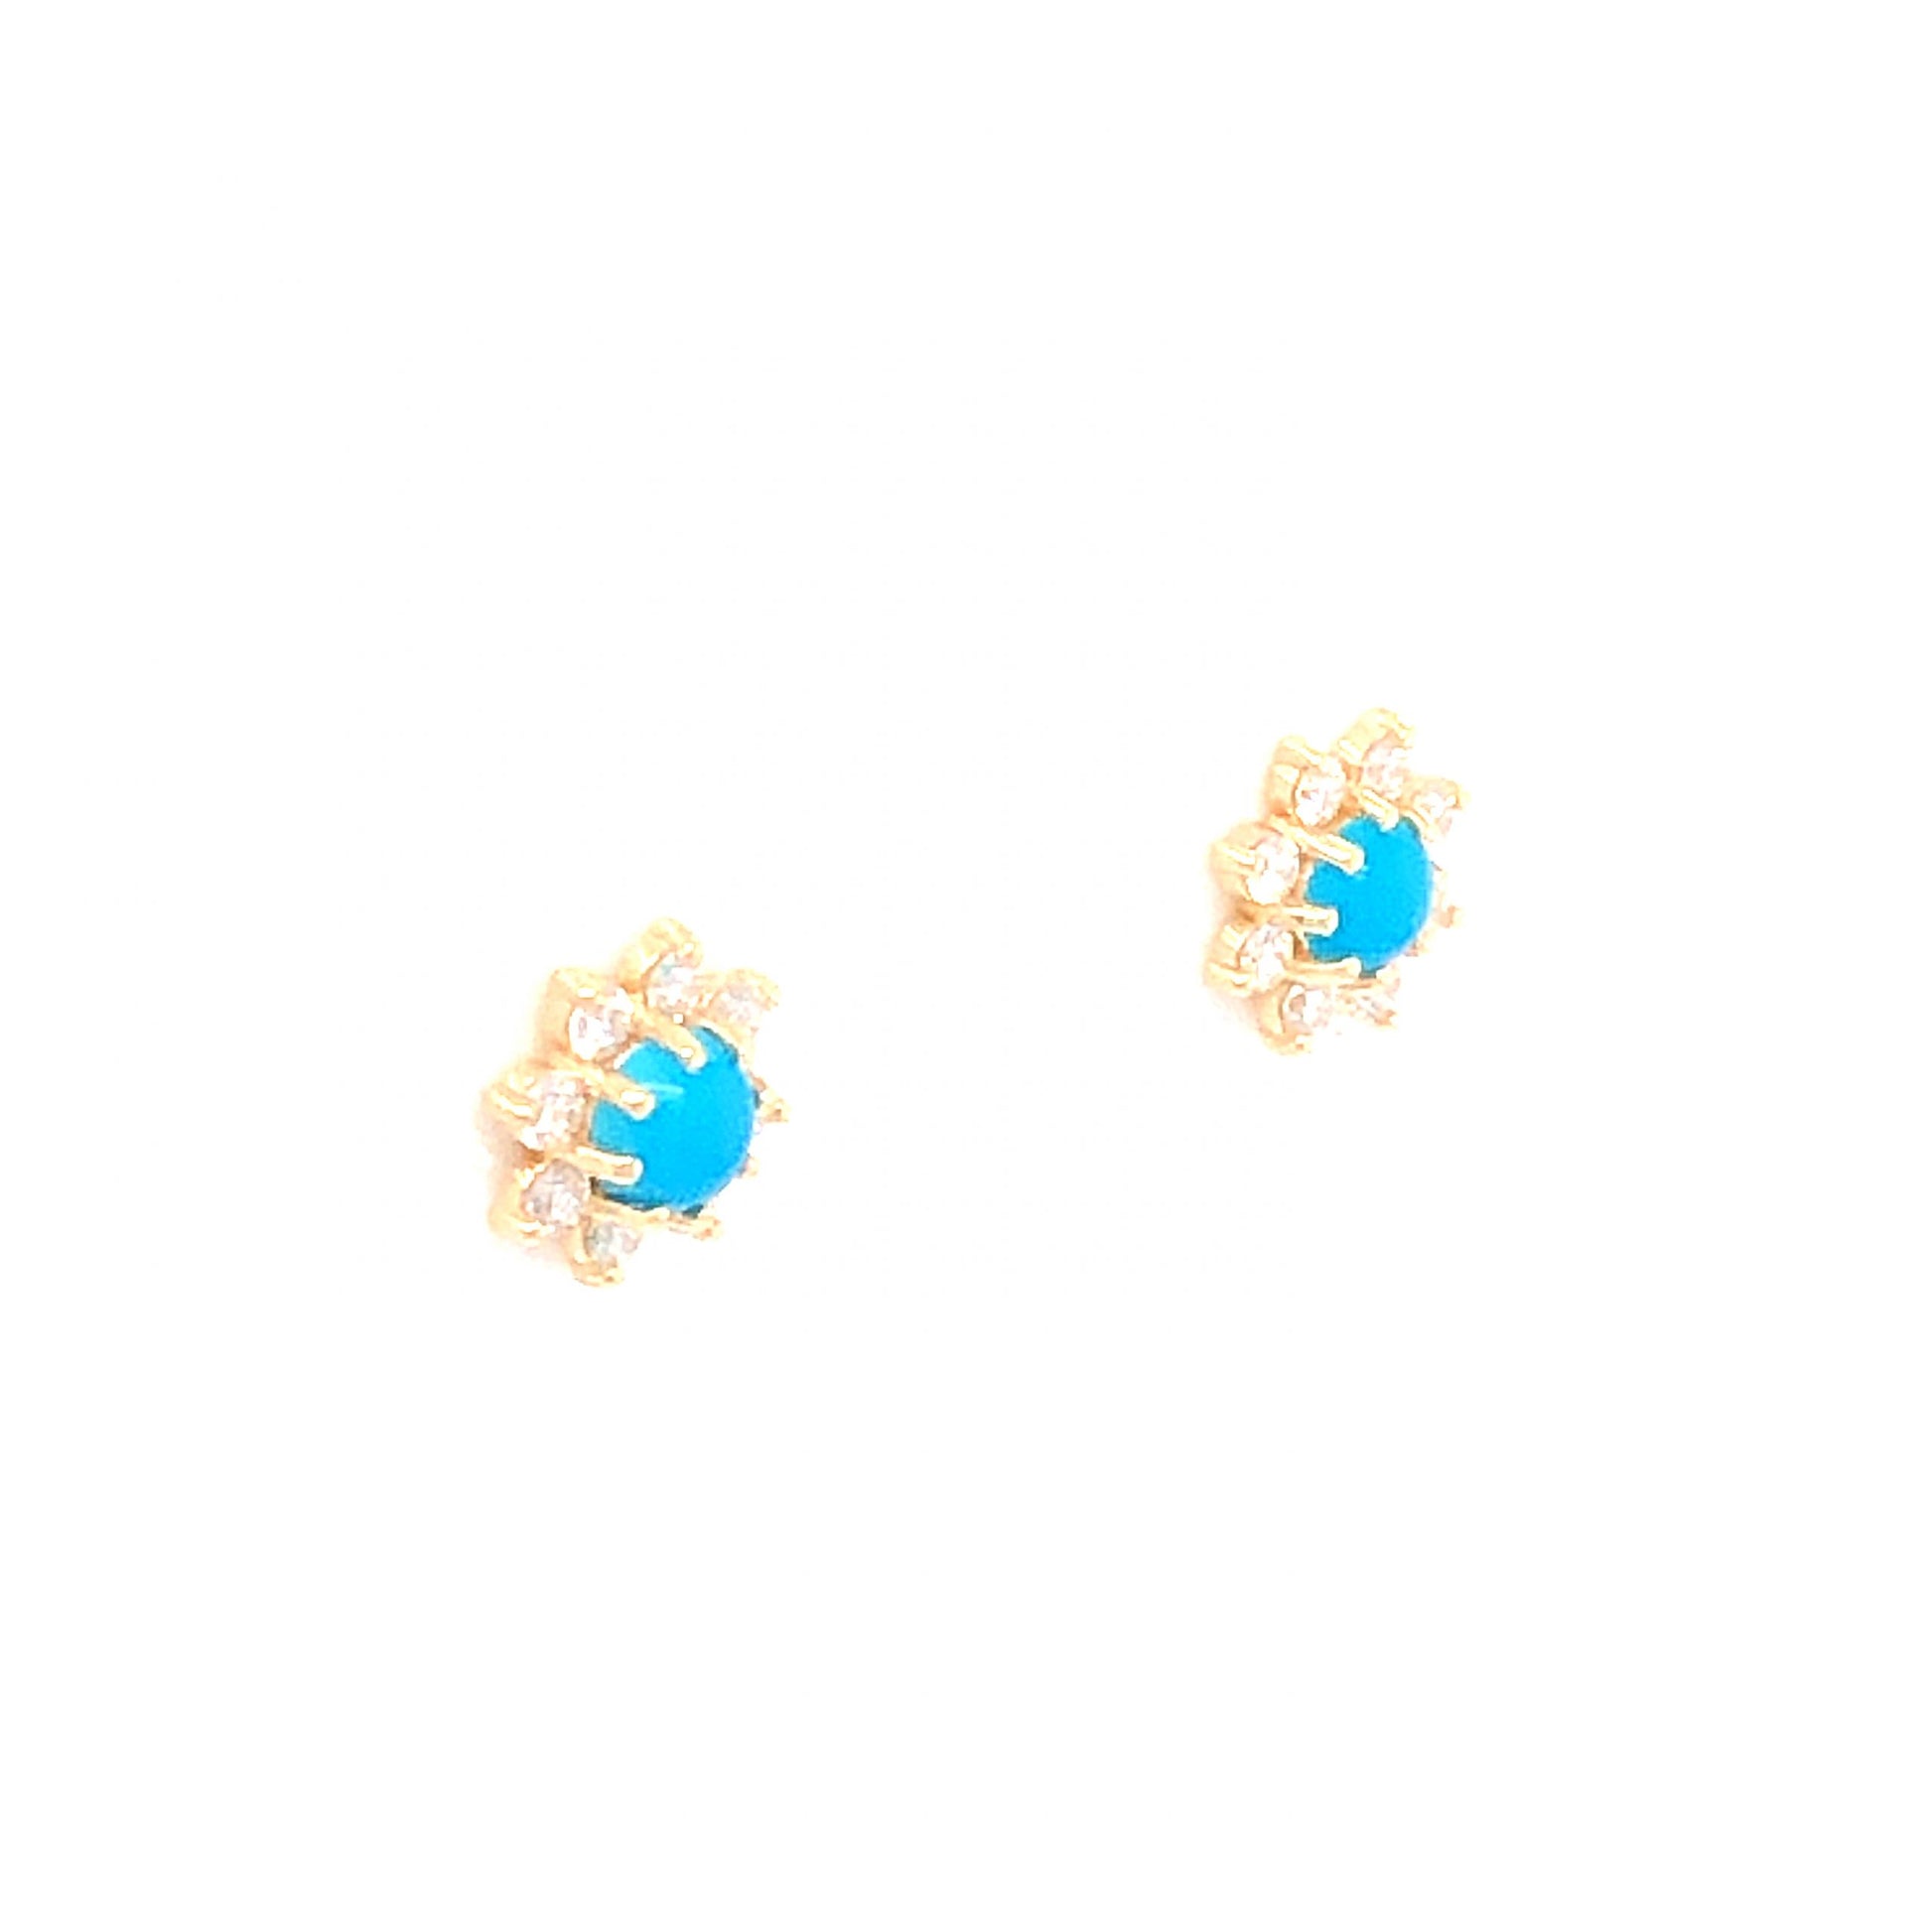 Turquoise and Diamond Stud Earrings in 14k Yellow Gold